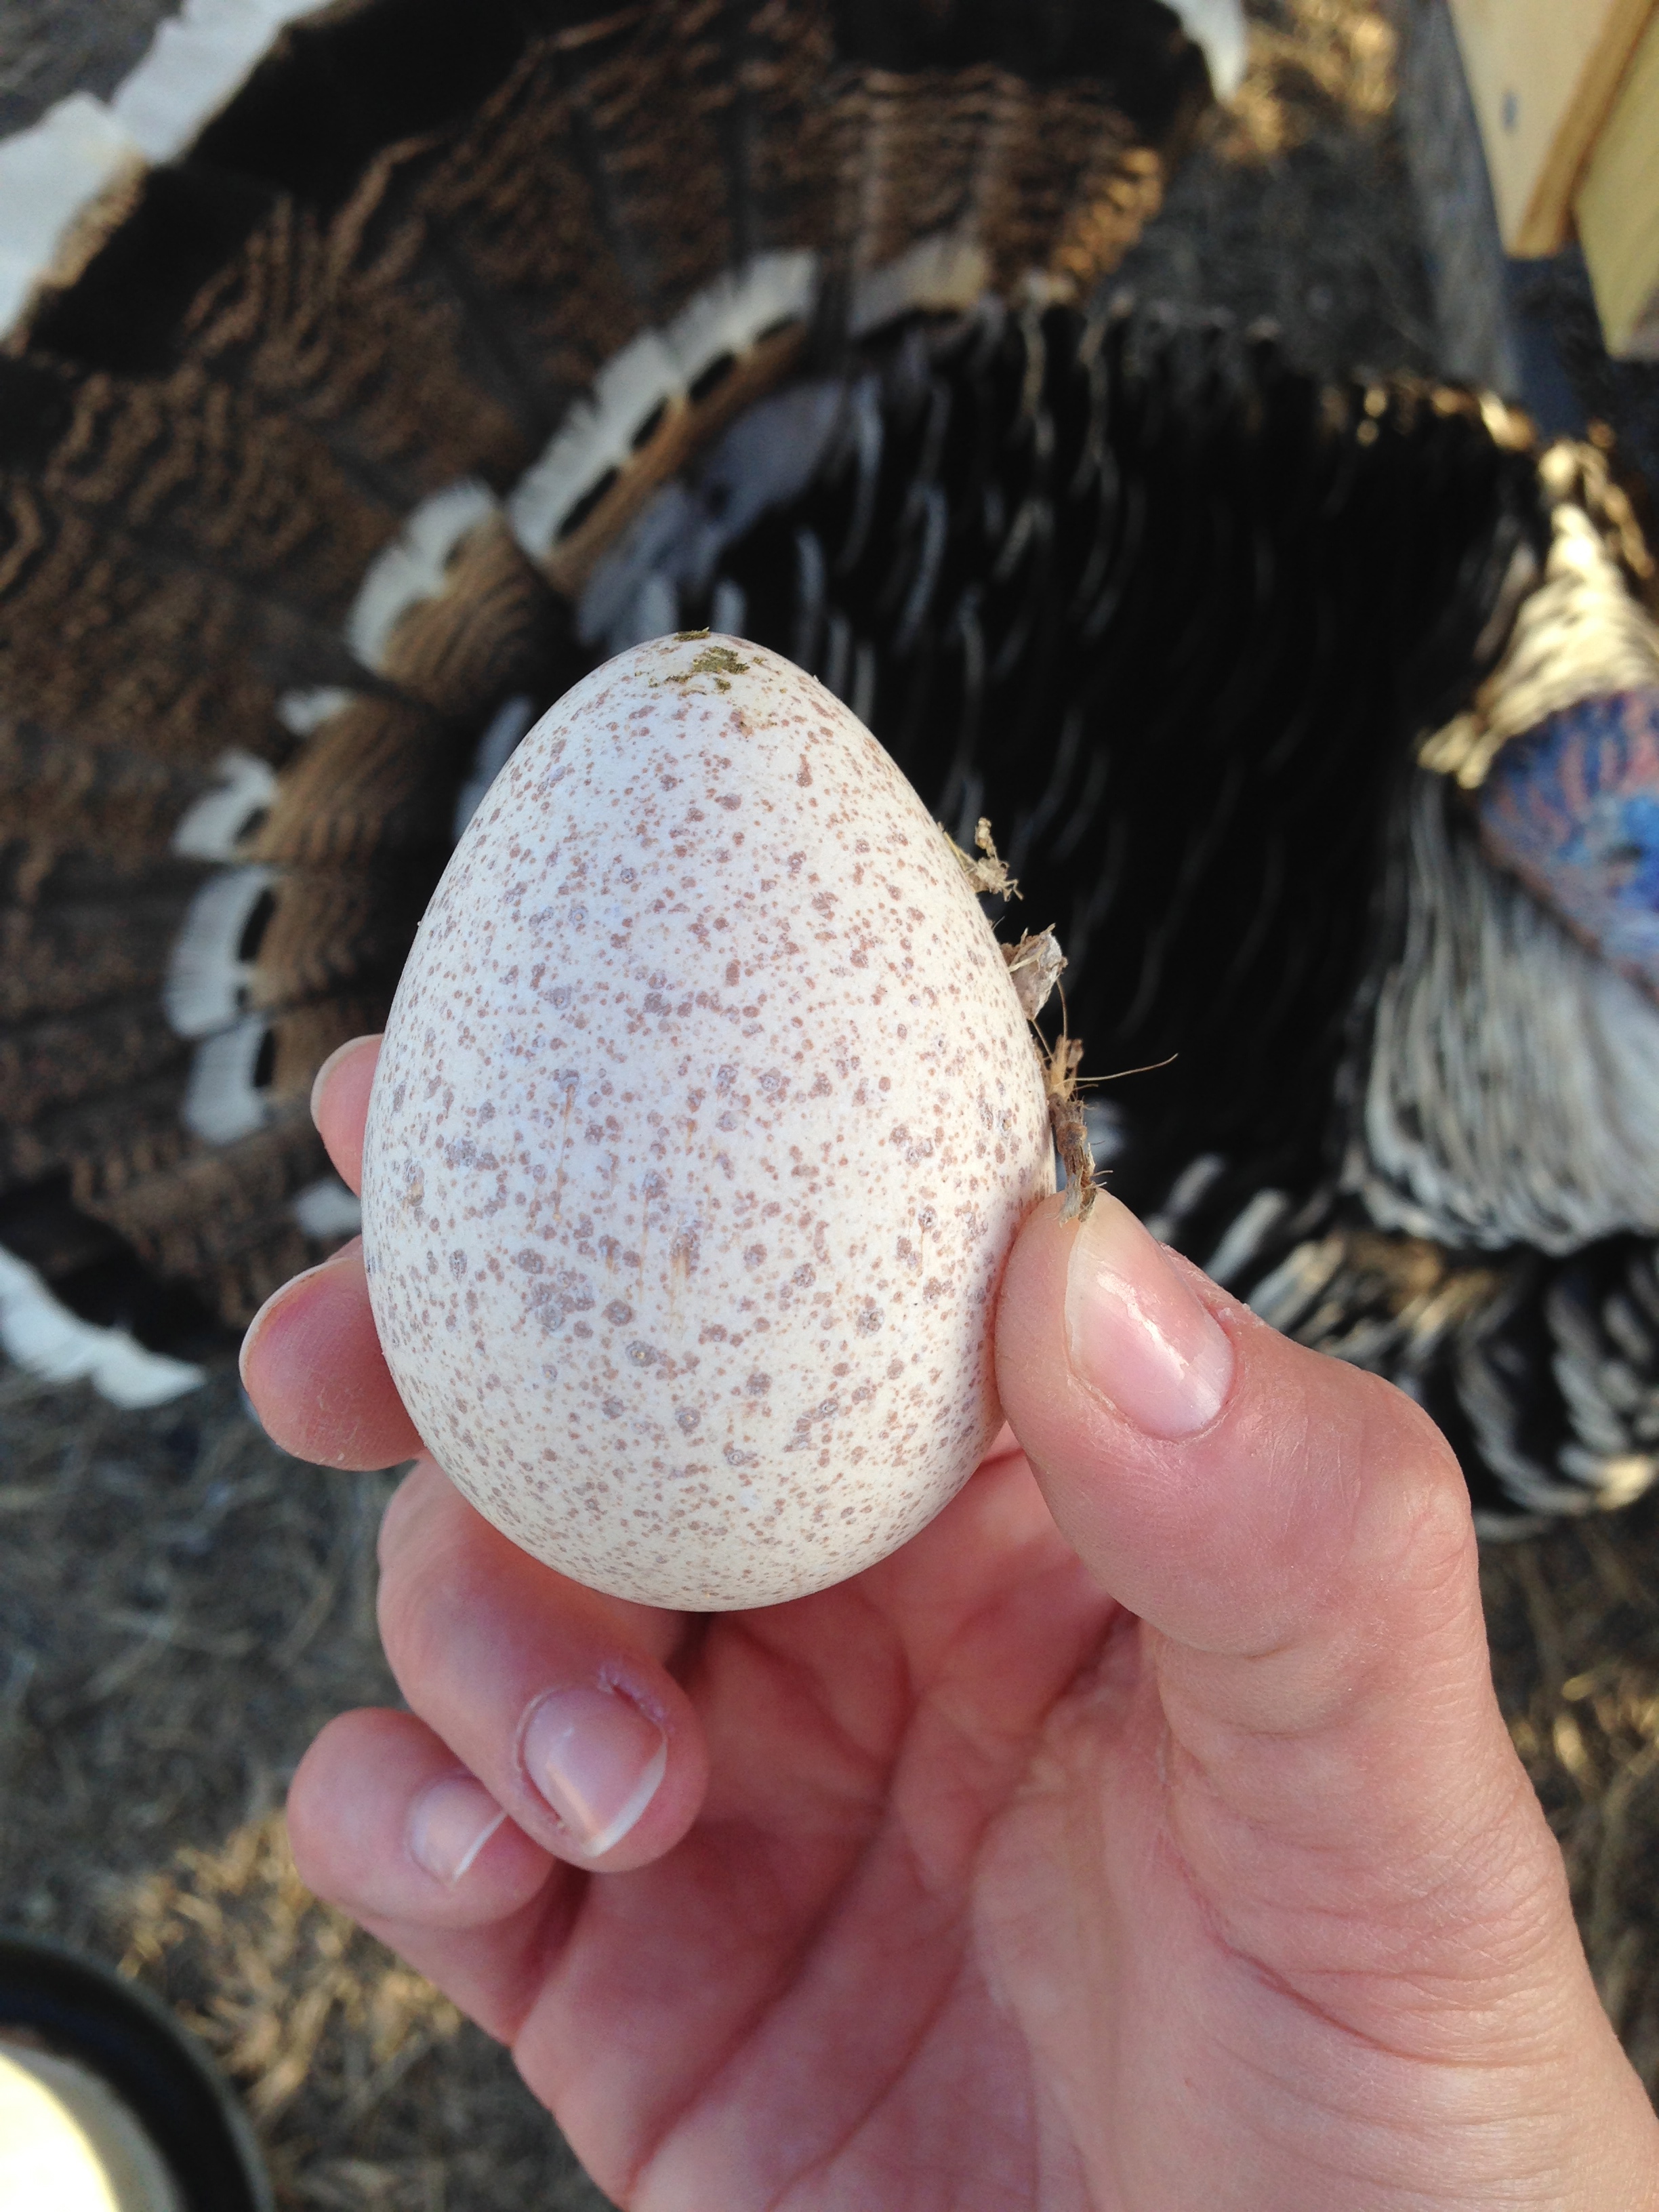 Our First Turkey Egg!